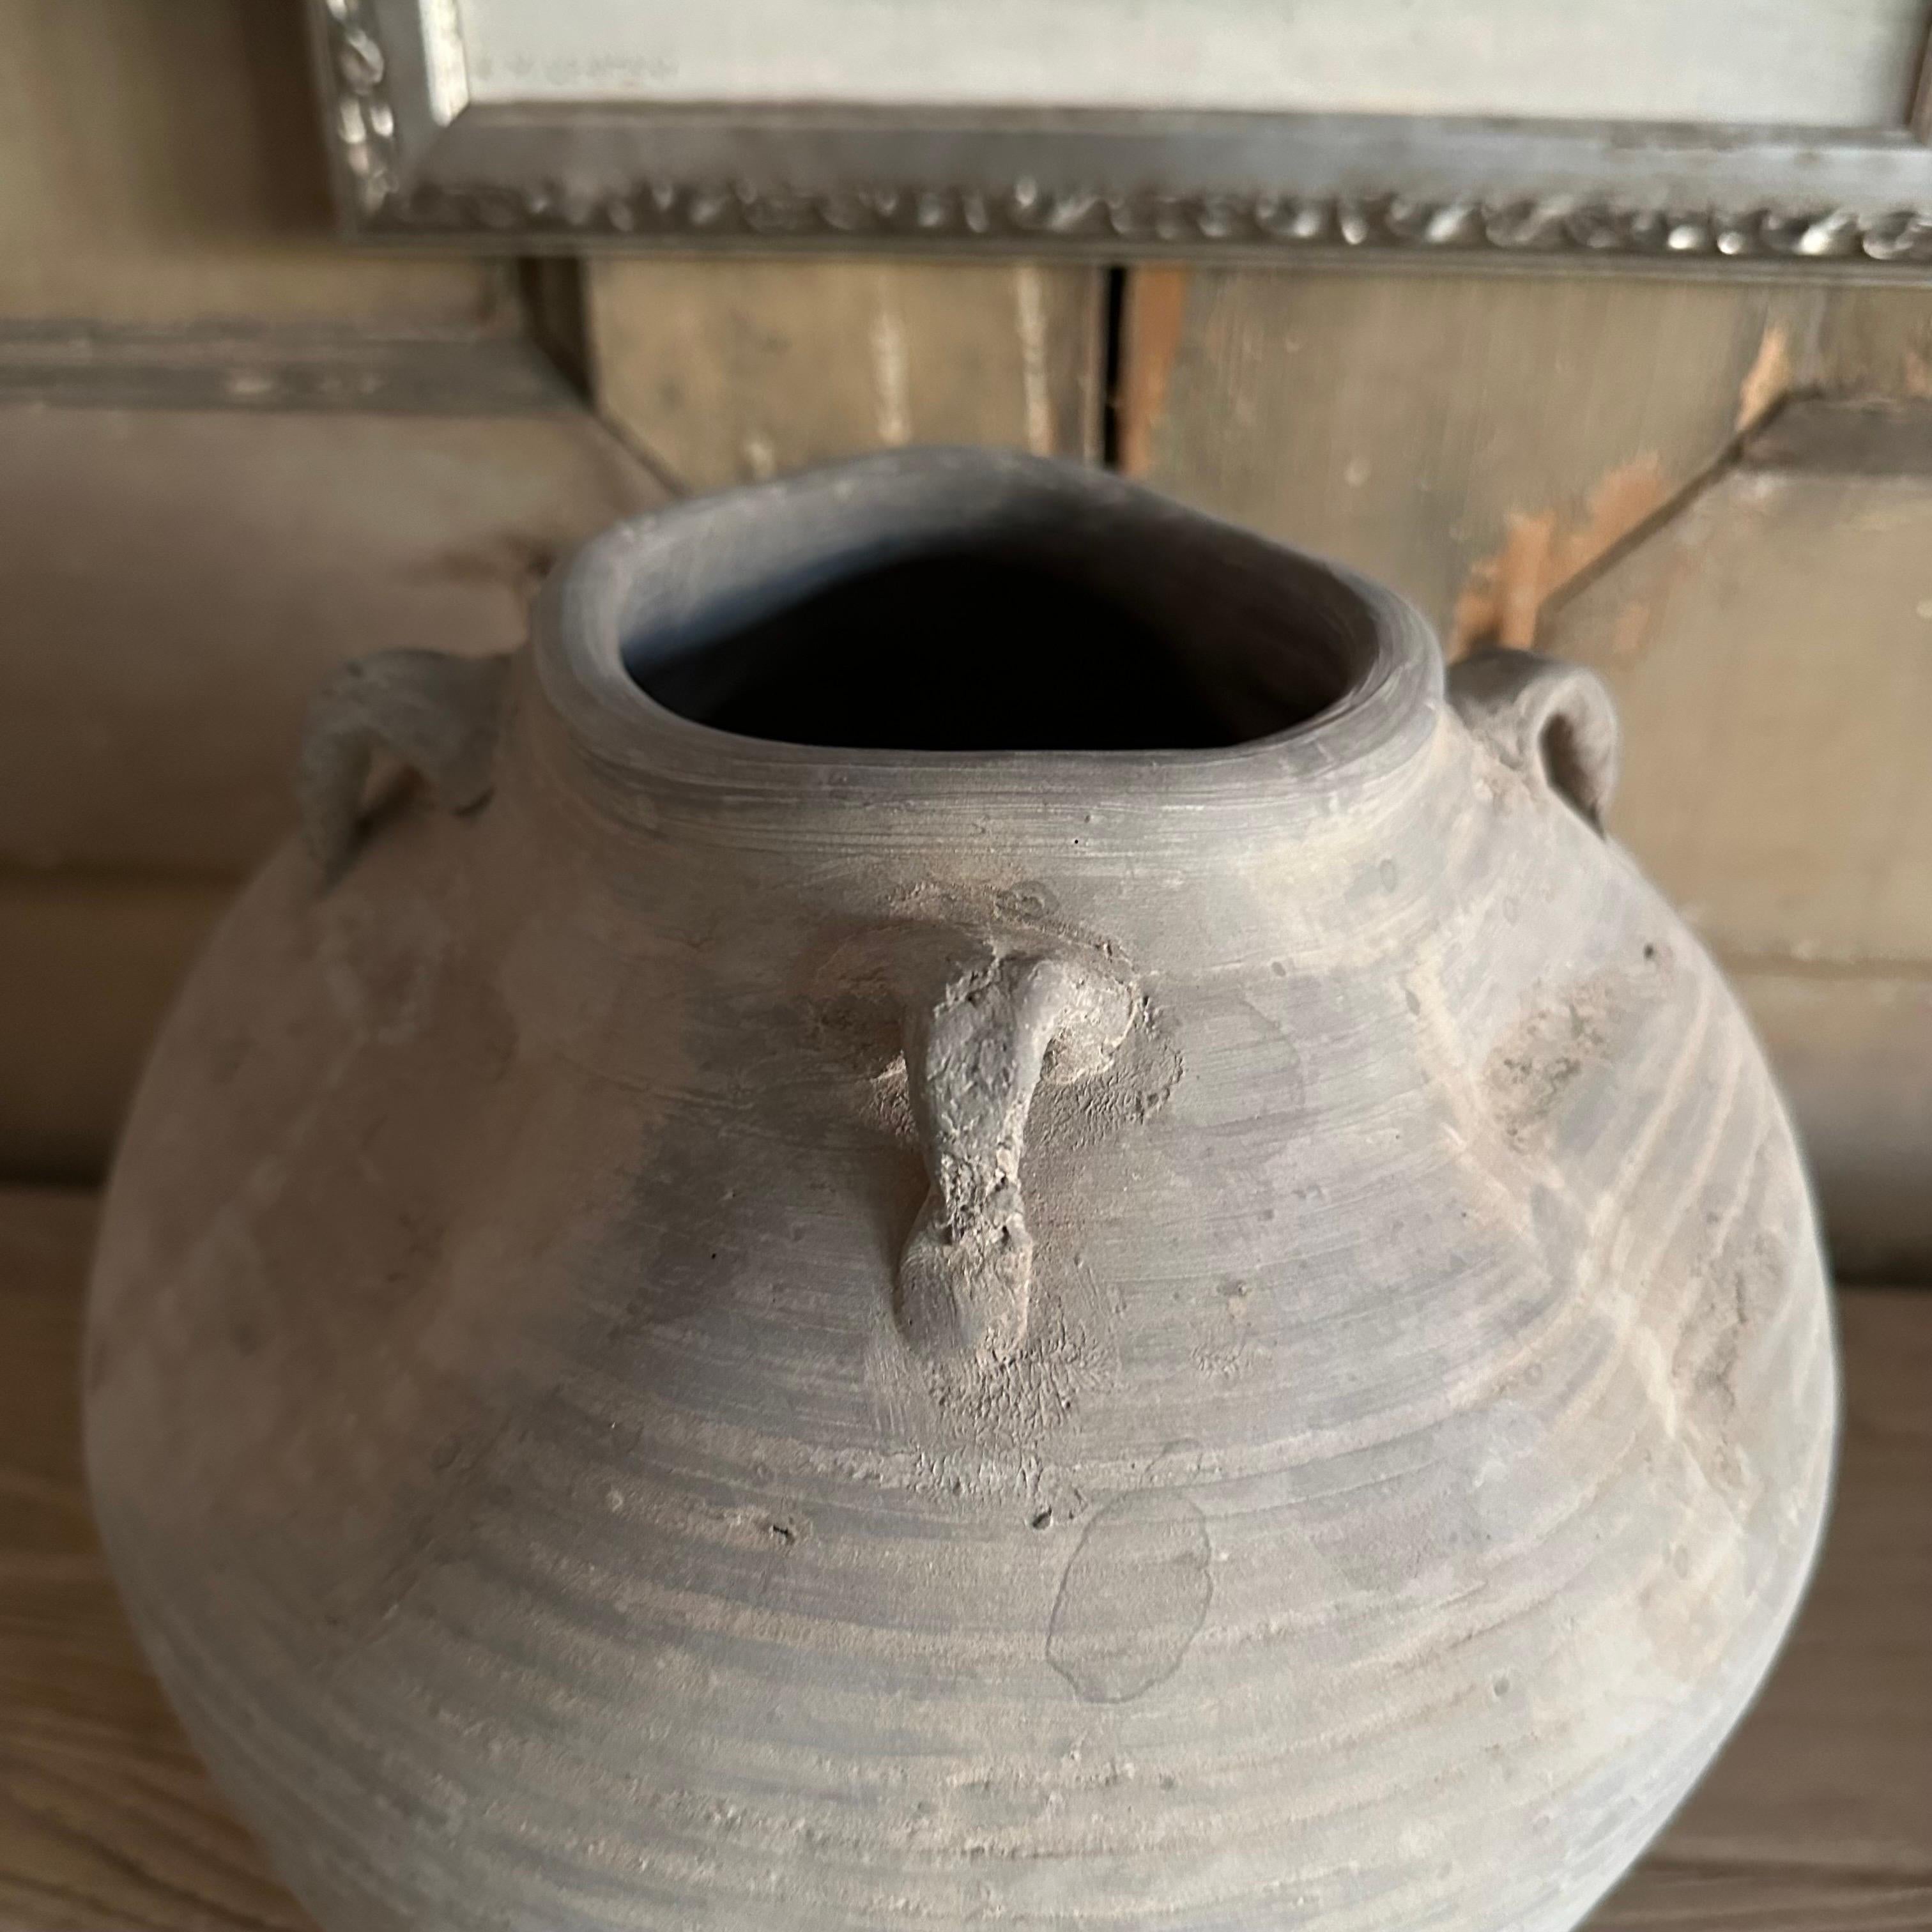 Stone / Clay Pottery in the wabi sabi style
Its distorted shape makes it a beautiful piece of art.
Use by itself or fill with flowers.
Size: 9.75” h x 10.5”d 
Opening 3.75”
1211-1
-Multiple vases available you will be receiving one similar from our